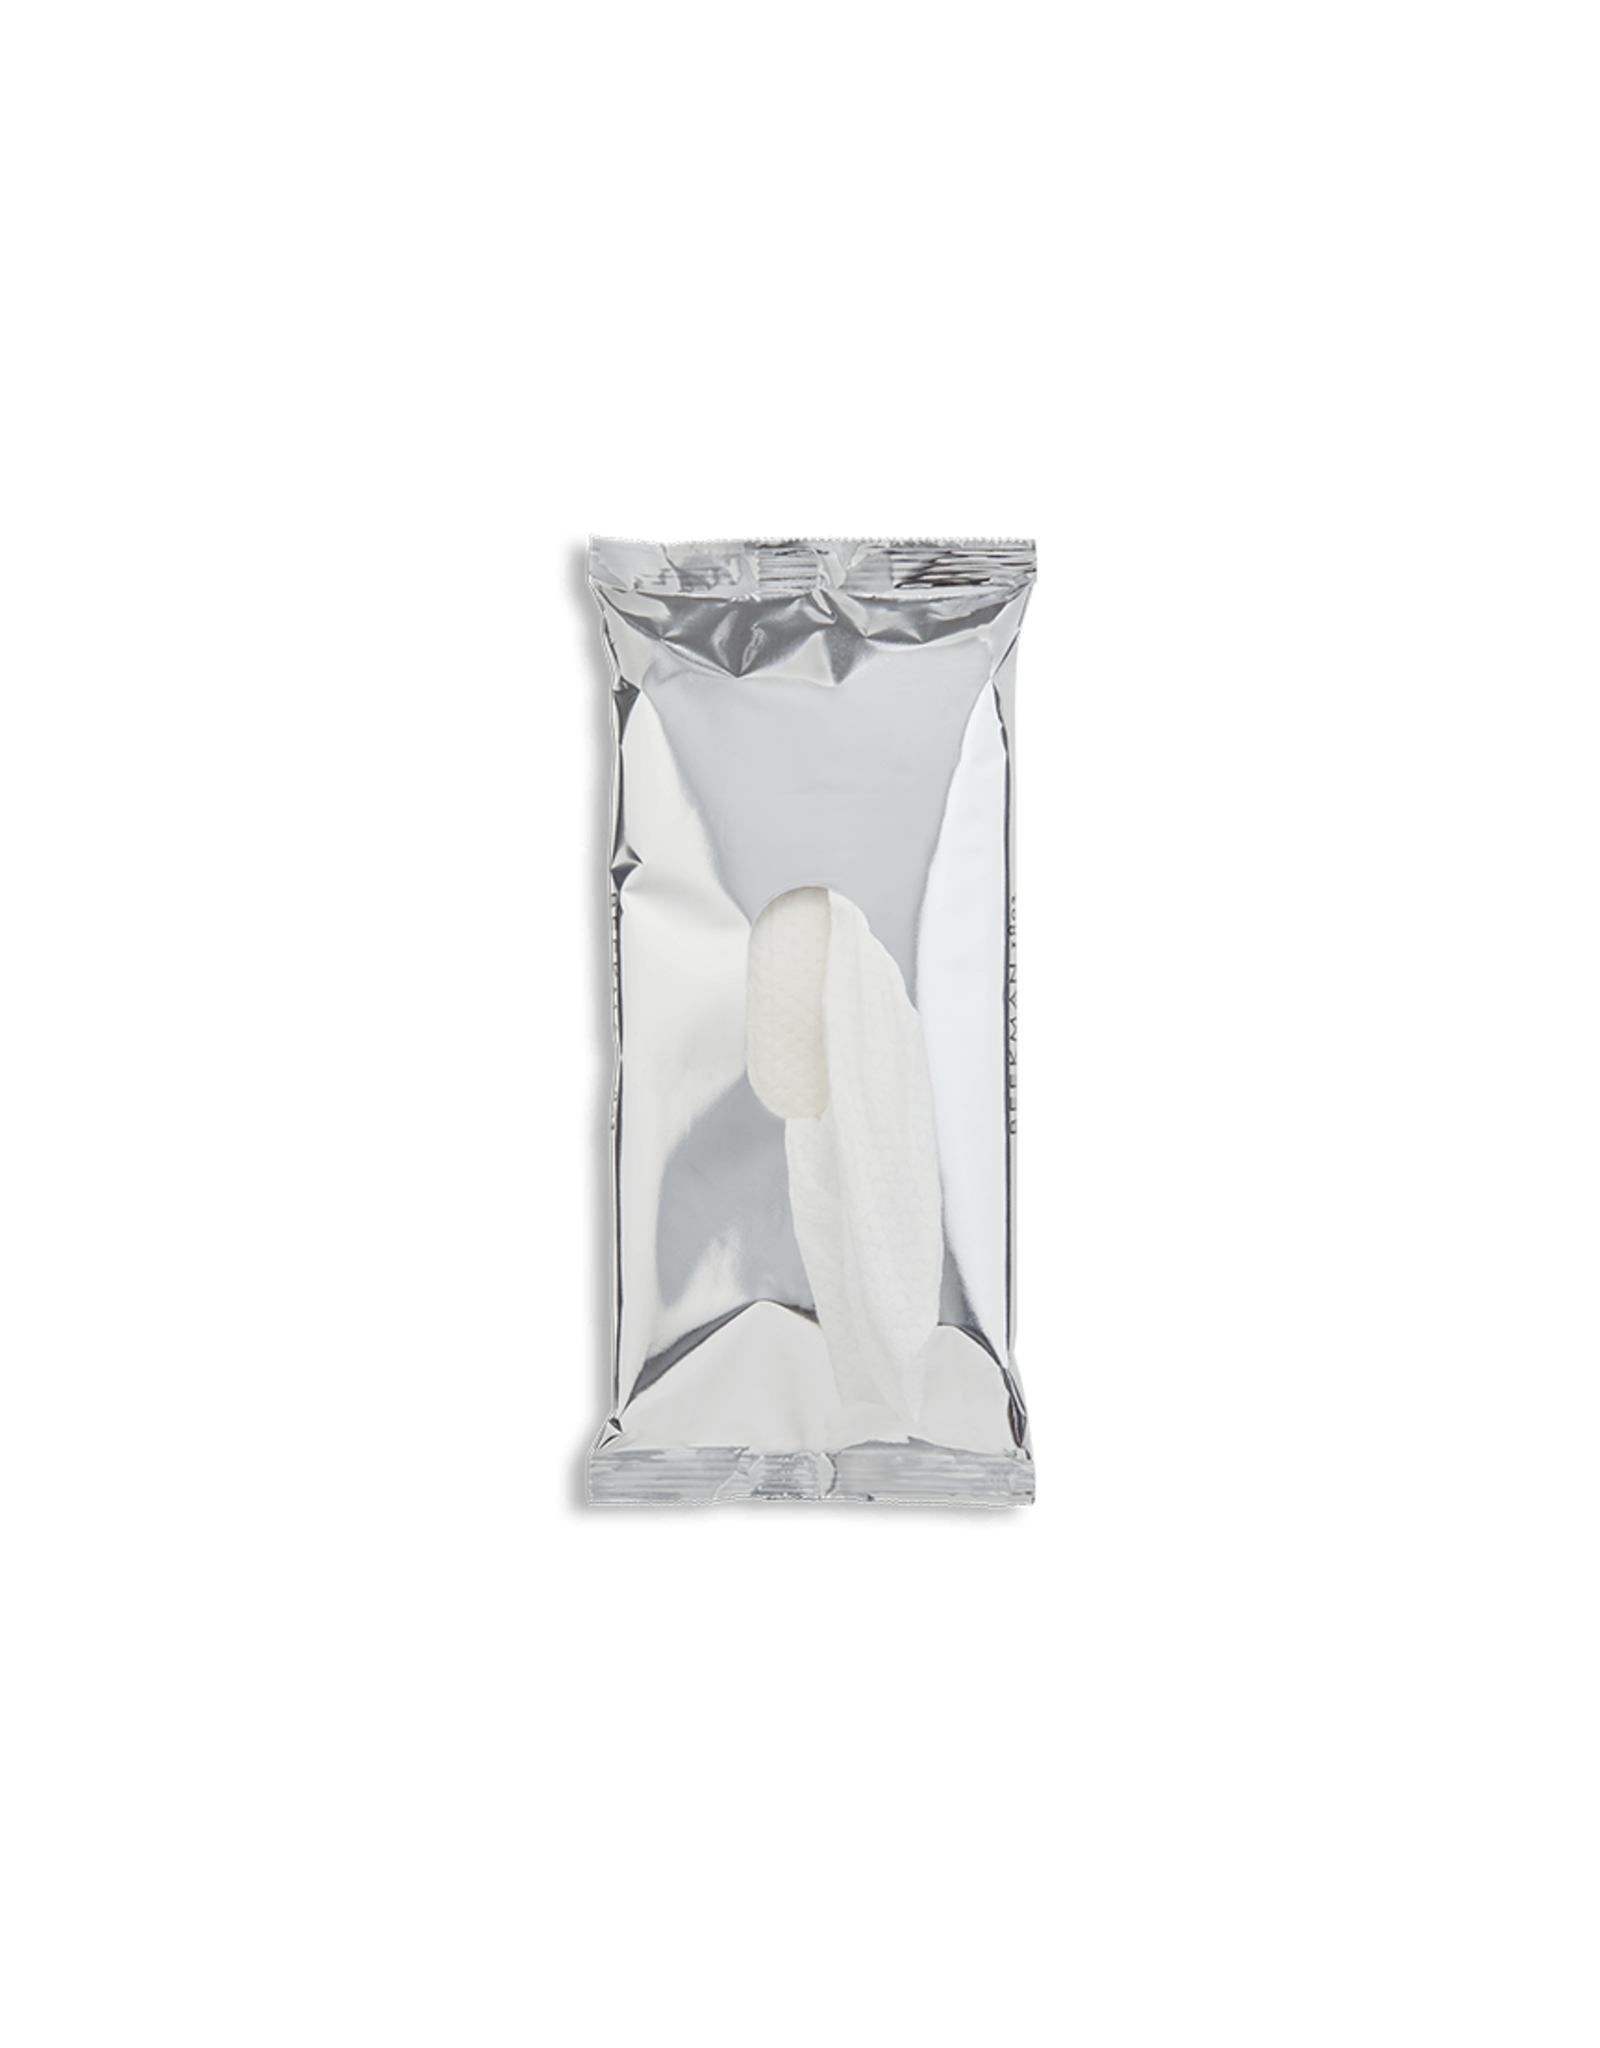 Beekman 1802 Facial Cleansing Wipes FRESH AIR Scent